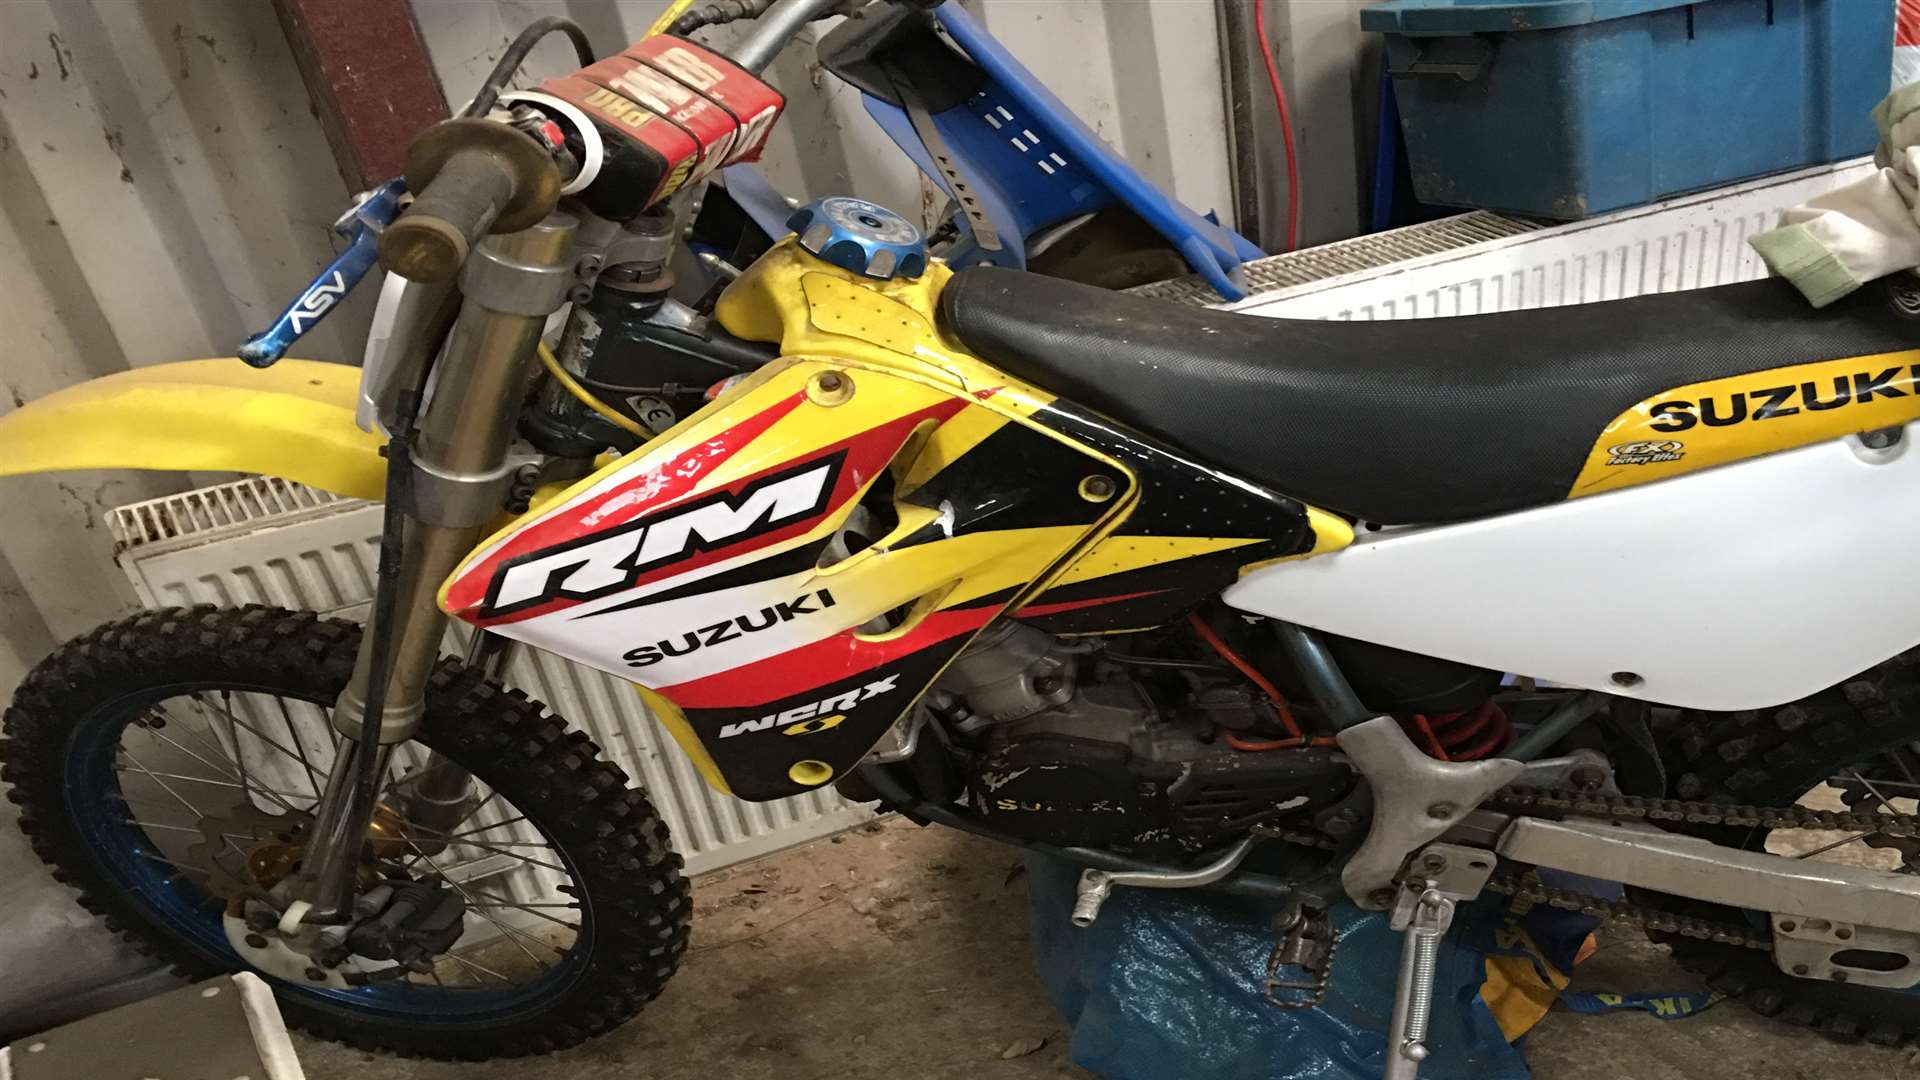 A Suzuki motorcycle was stolen from an outbuilding in Cryals Road, Brenchley. Picture: Kent Police